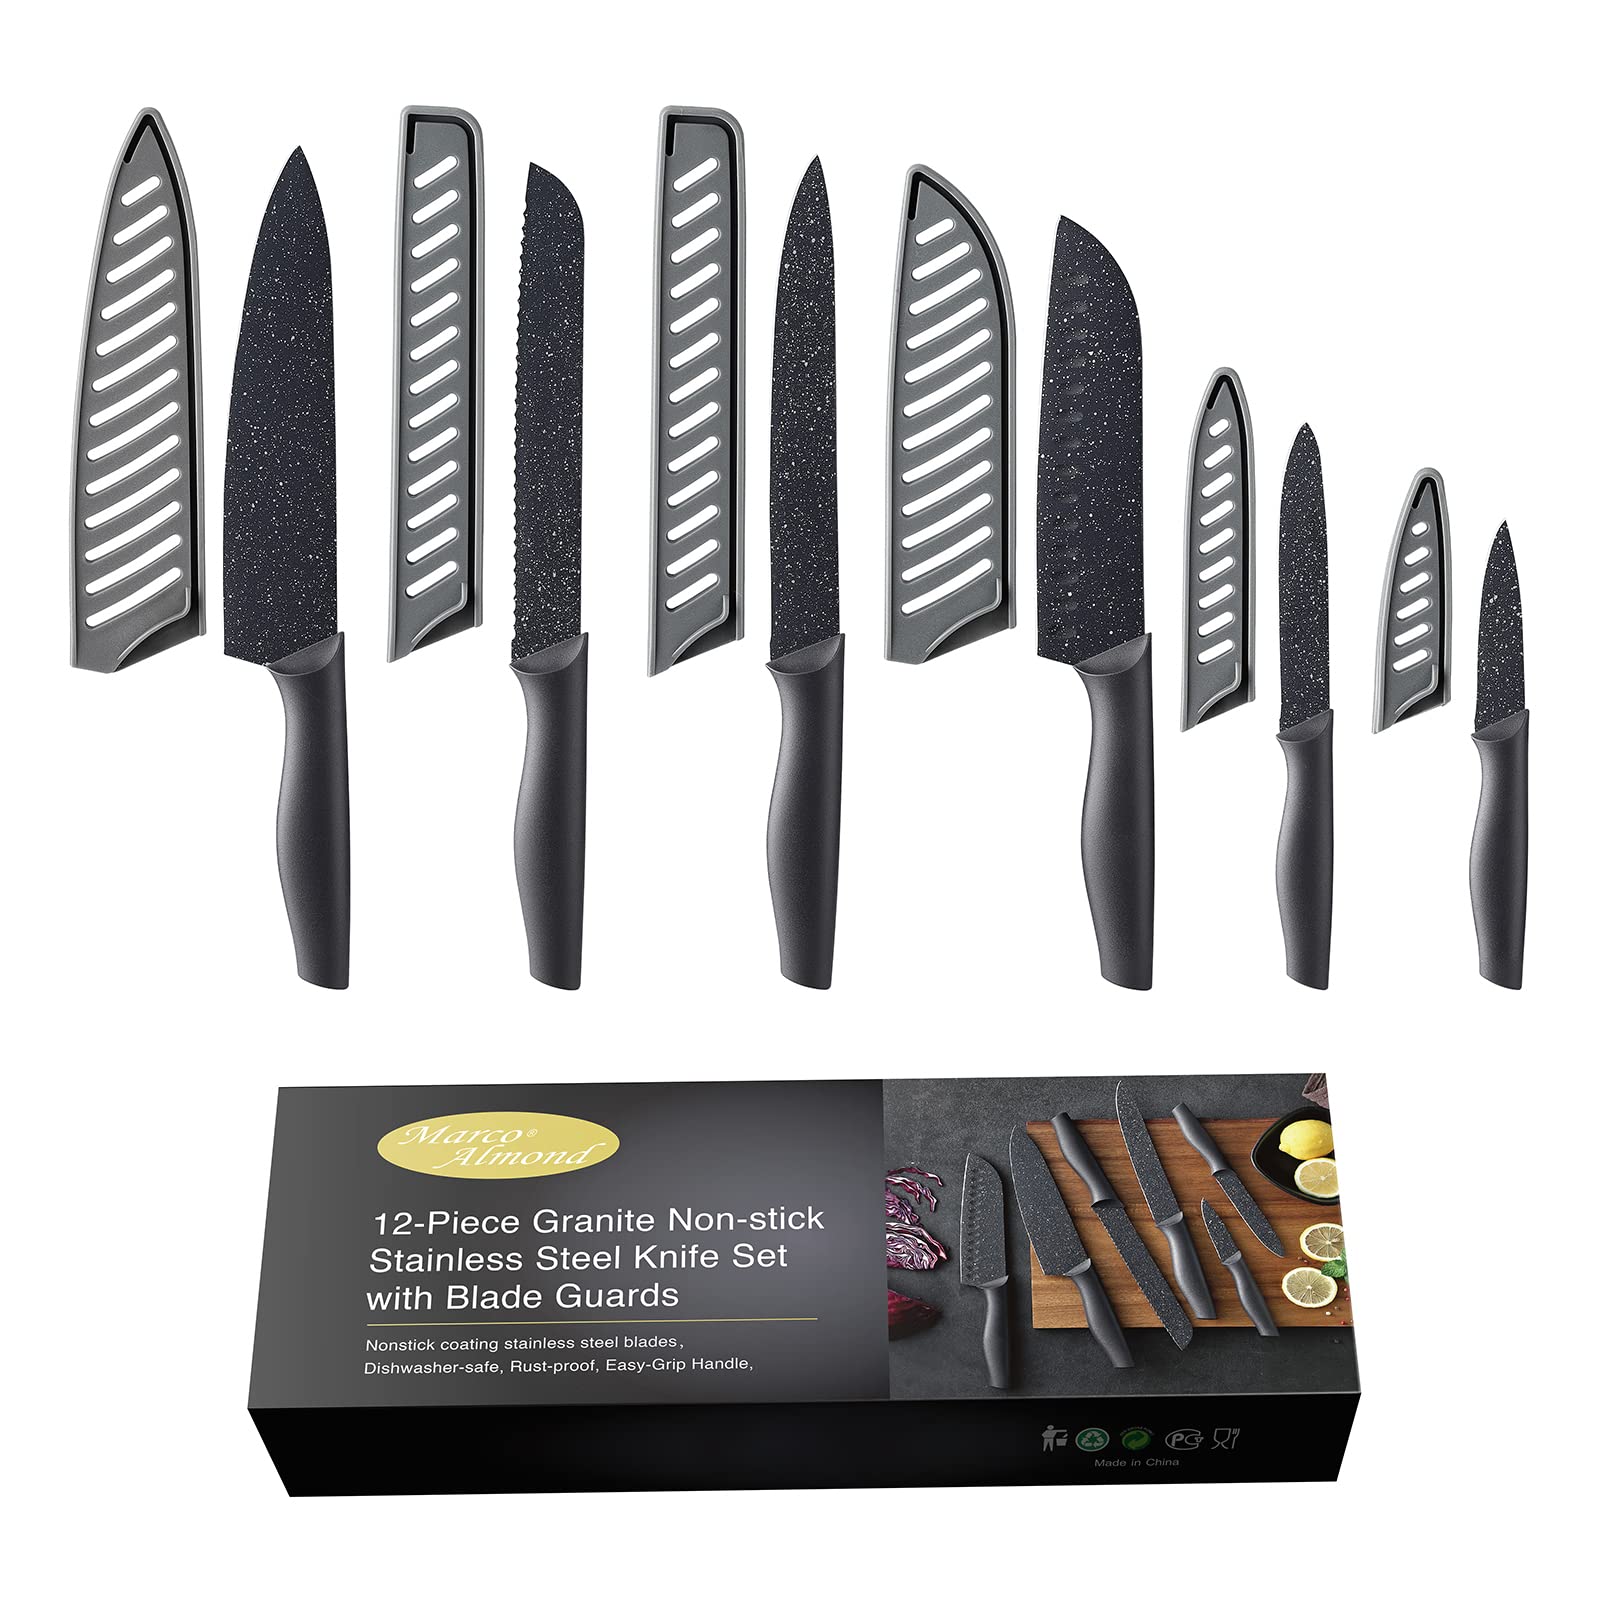 Marco Almond KYA39 Kitchen Knife Sets + KYA59 Titanium Coated Stainless Steel Long Handle Spoons